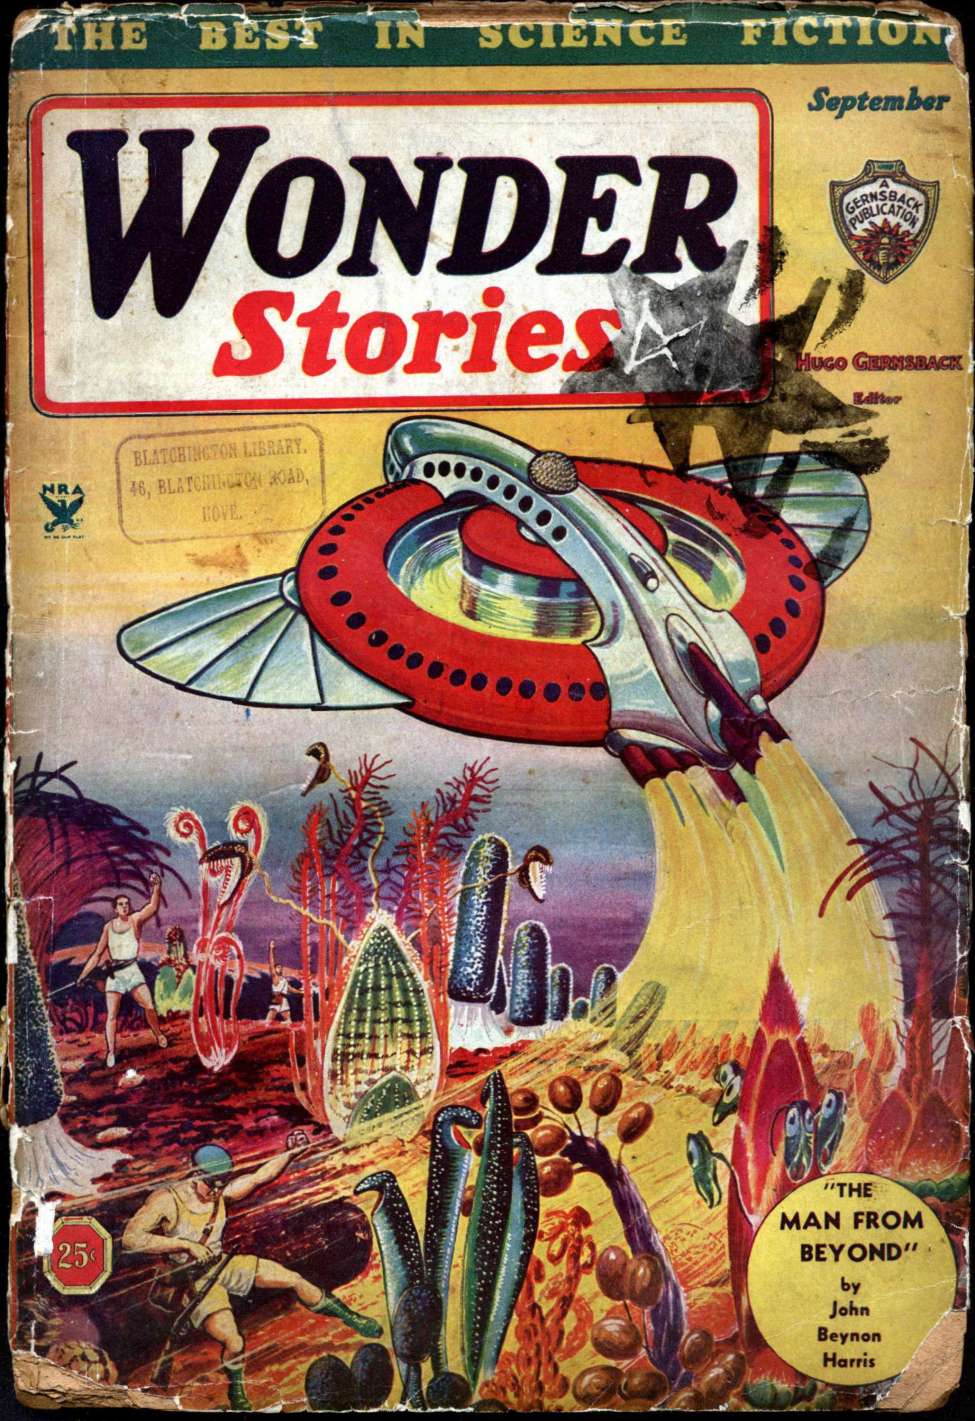 Comic Book Cover For Wonder Stories v6 4 - The Fall of the Eiffel Tower - Charles de Richter